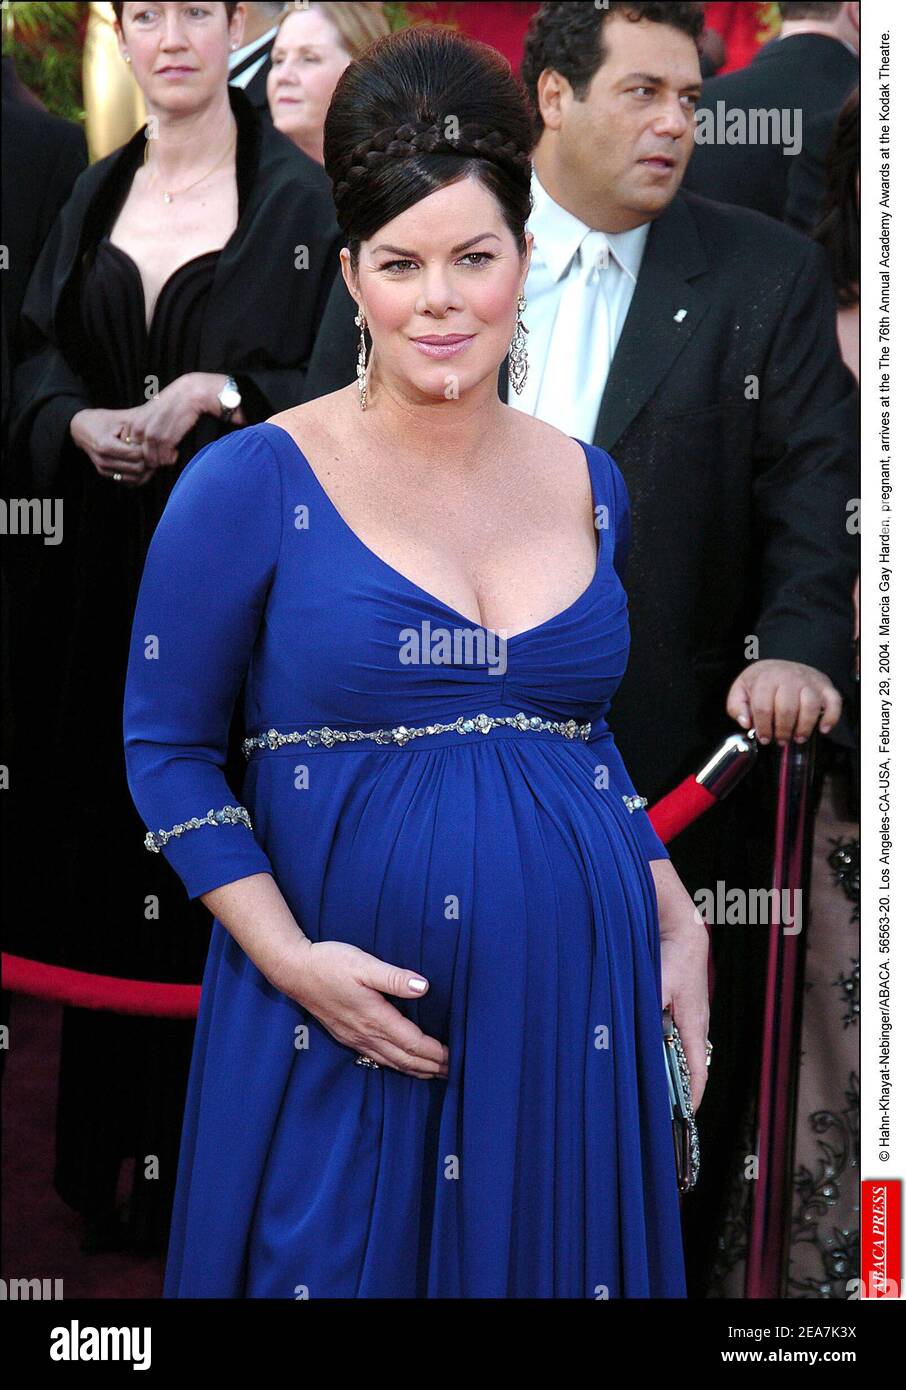 Marcia gay harden images